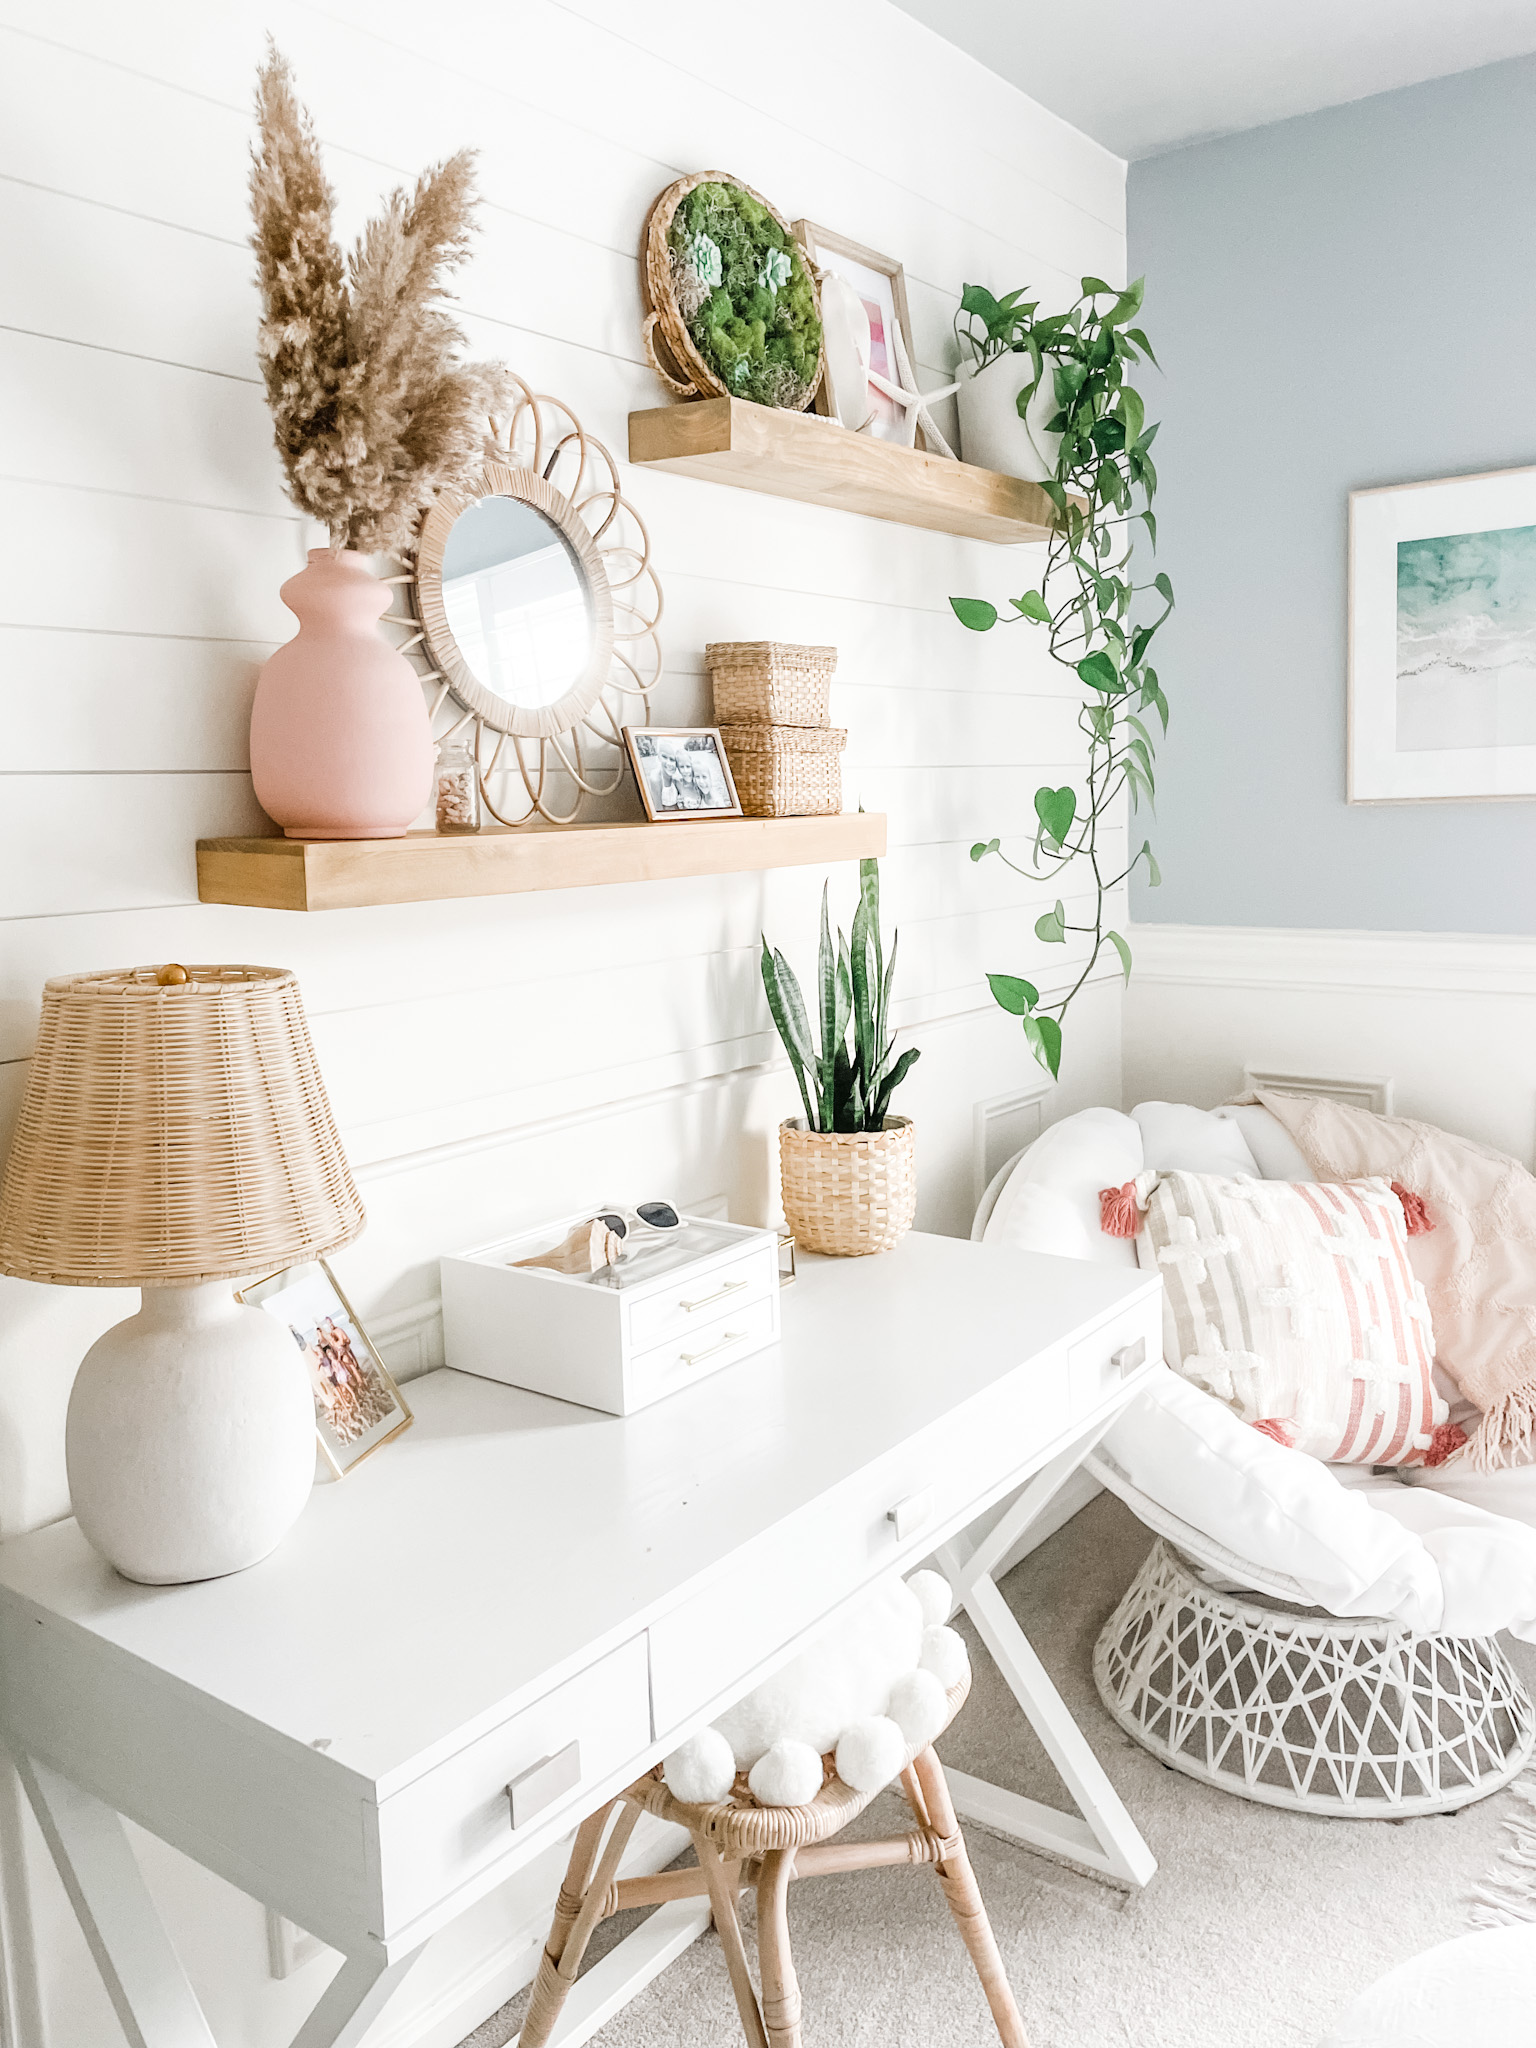 How To Decorate With Shells For A Beachy Look + Shell Inspo!